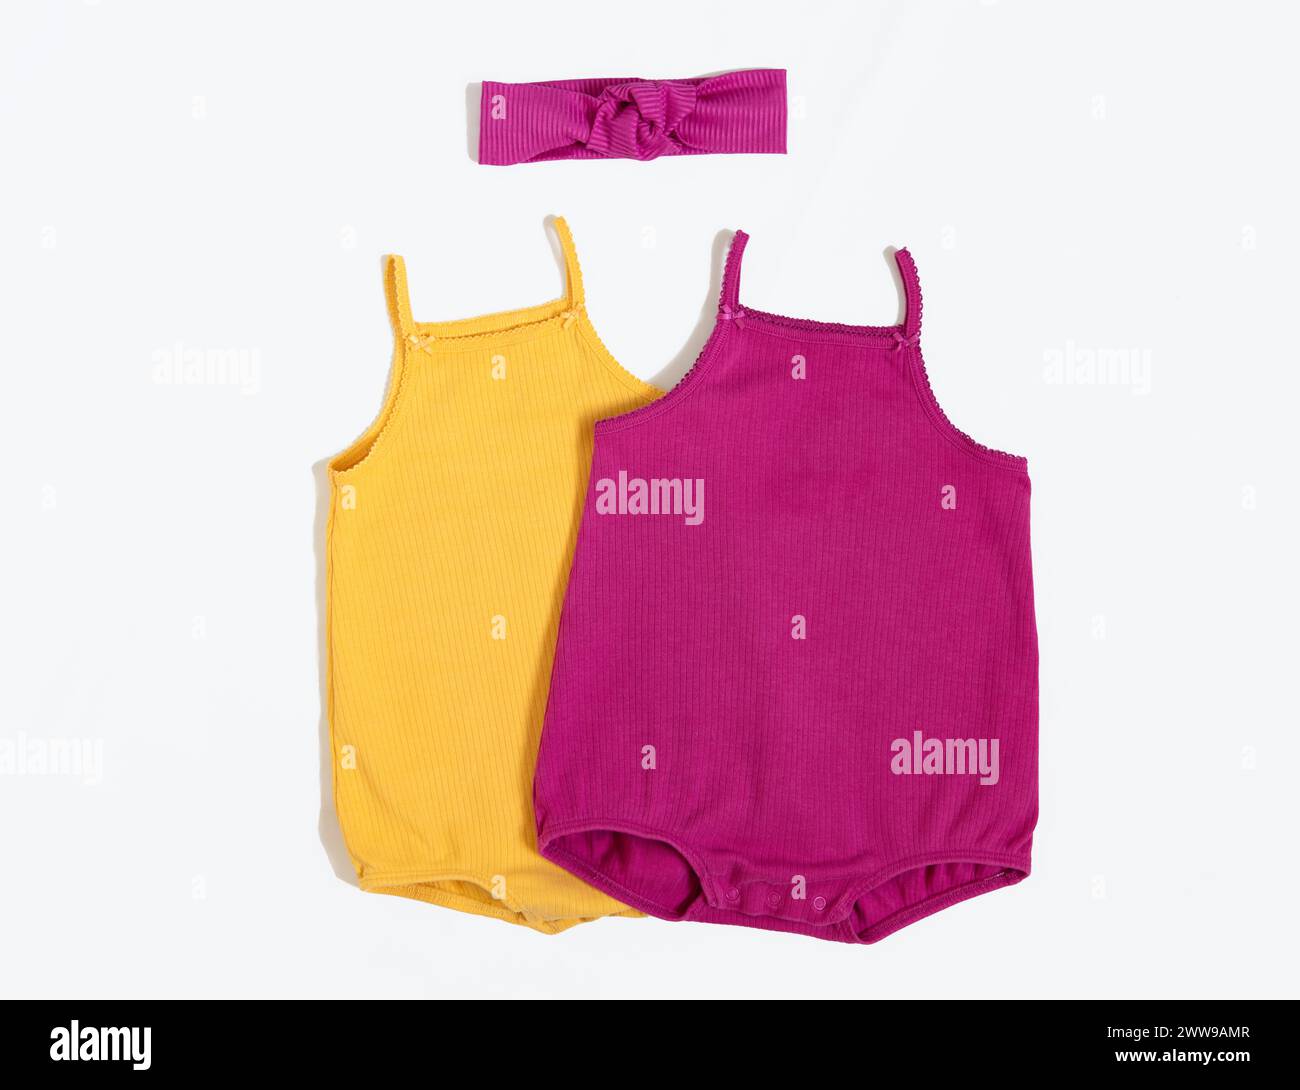 Summer outfit. Baby vest bodysuit yellow and pink color with head accessories. Top view, flat lay on white. Stock Photo